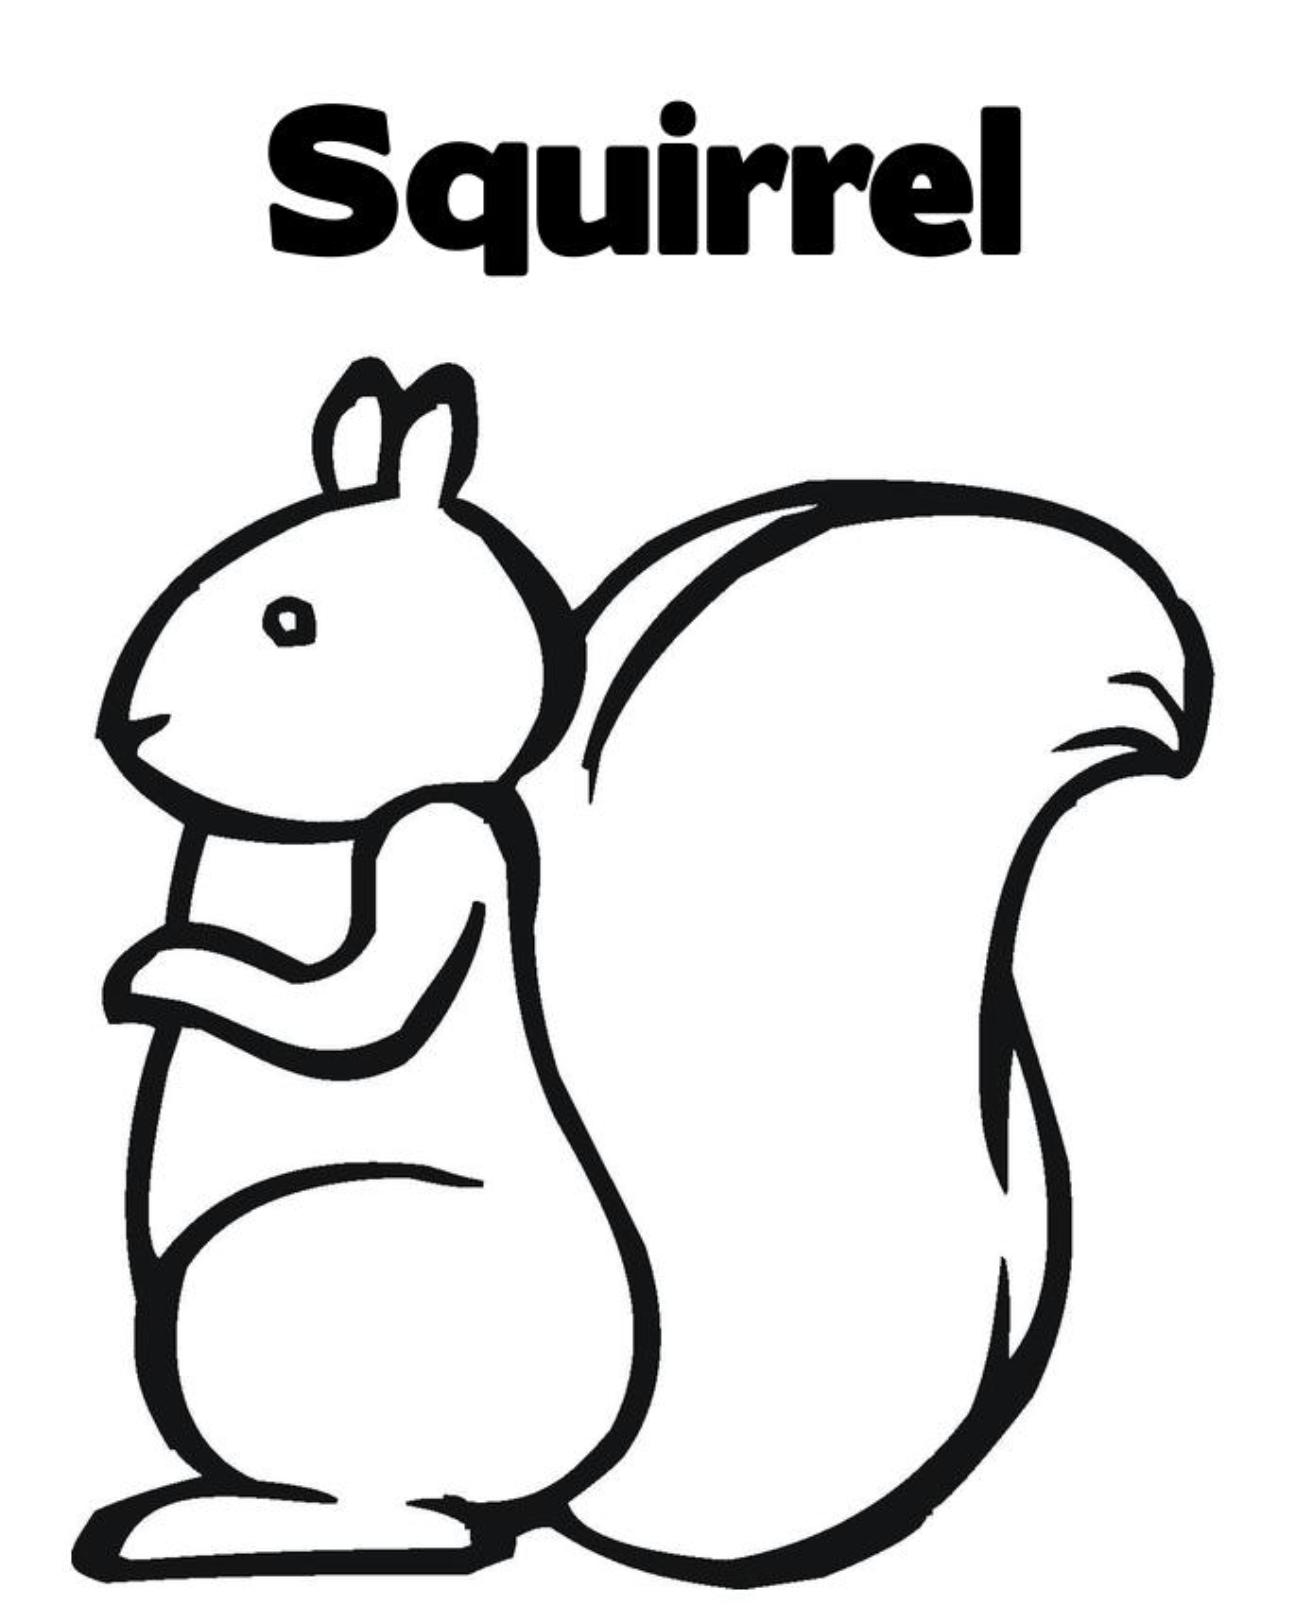 free-squirrel-pictures-to-print-download-free-squirrel-pictures-to